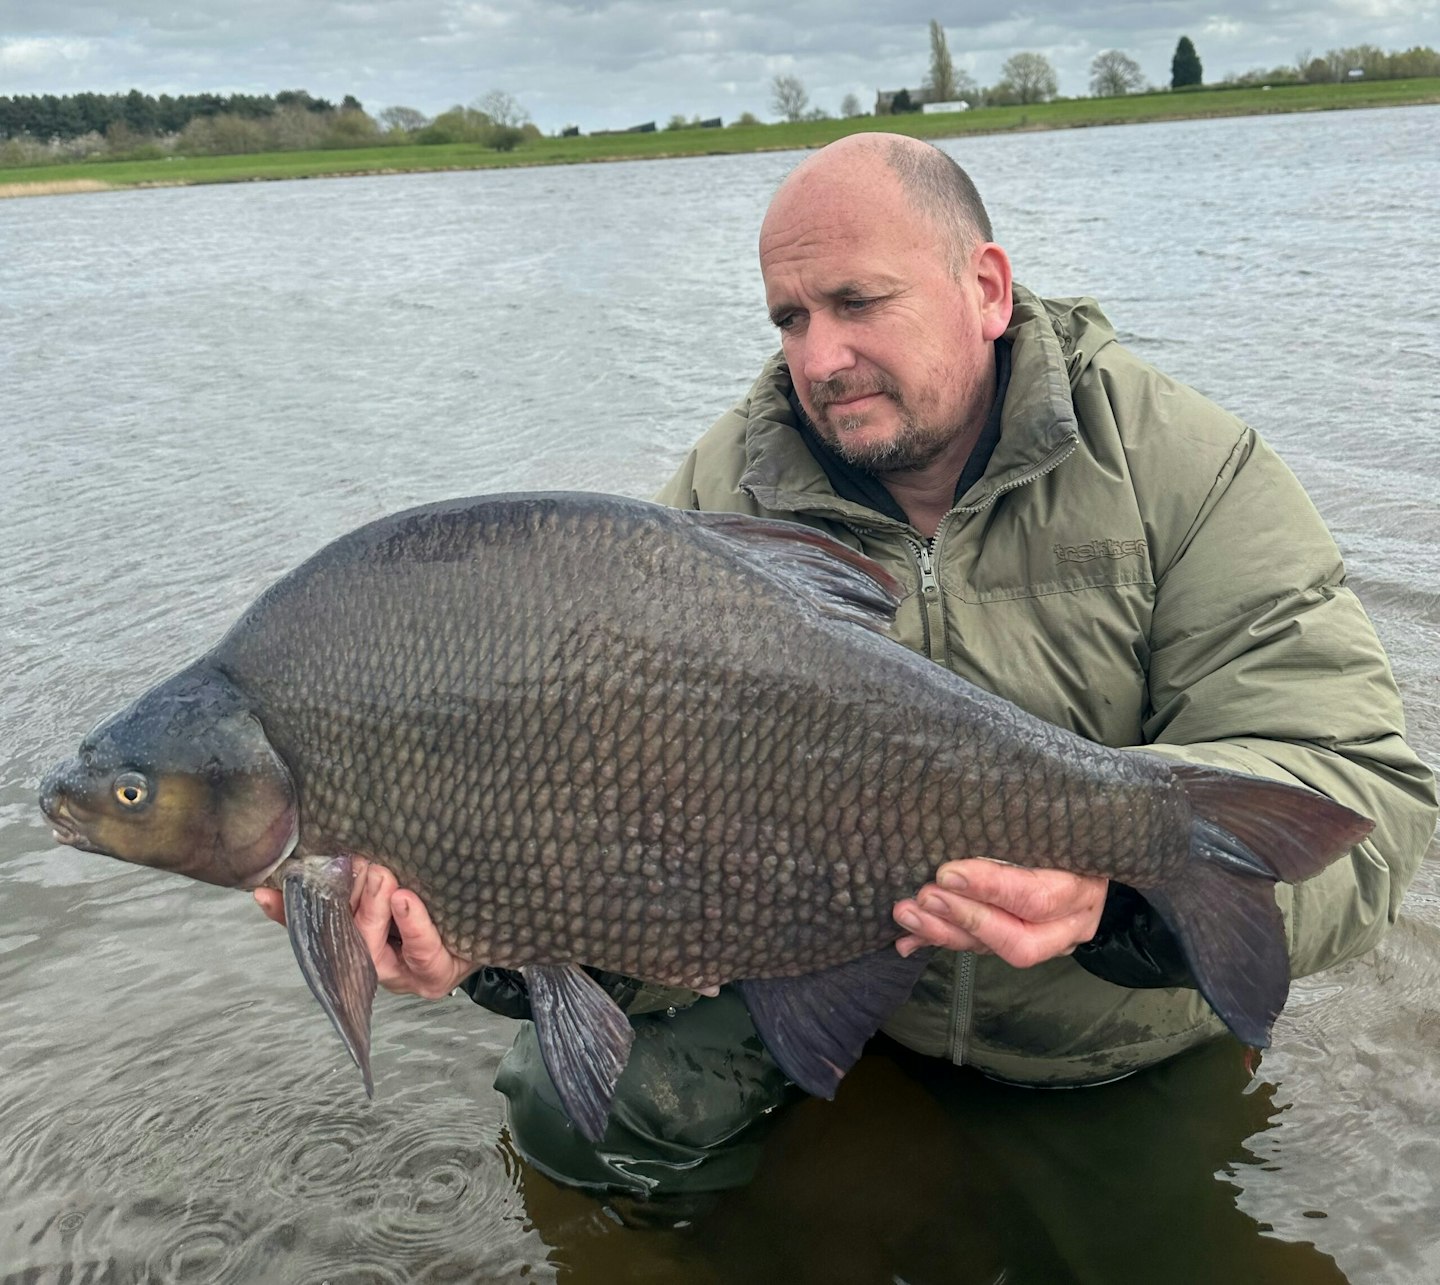 Lee Snow with the 'smaller' 17lb 1oz bream.